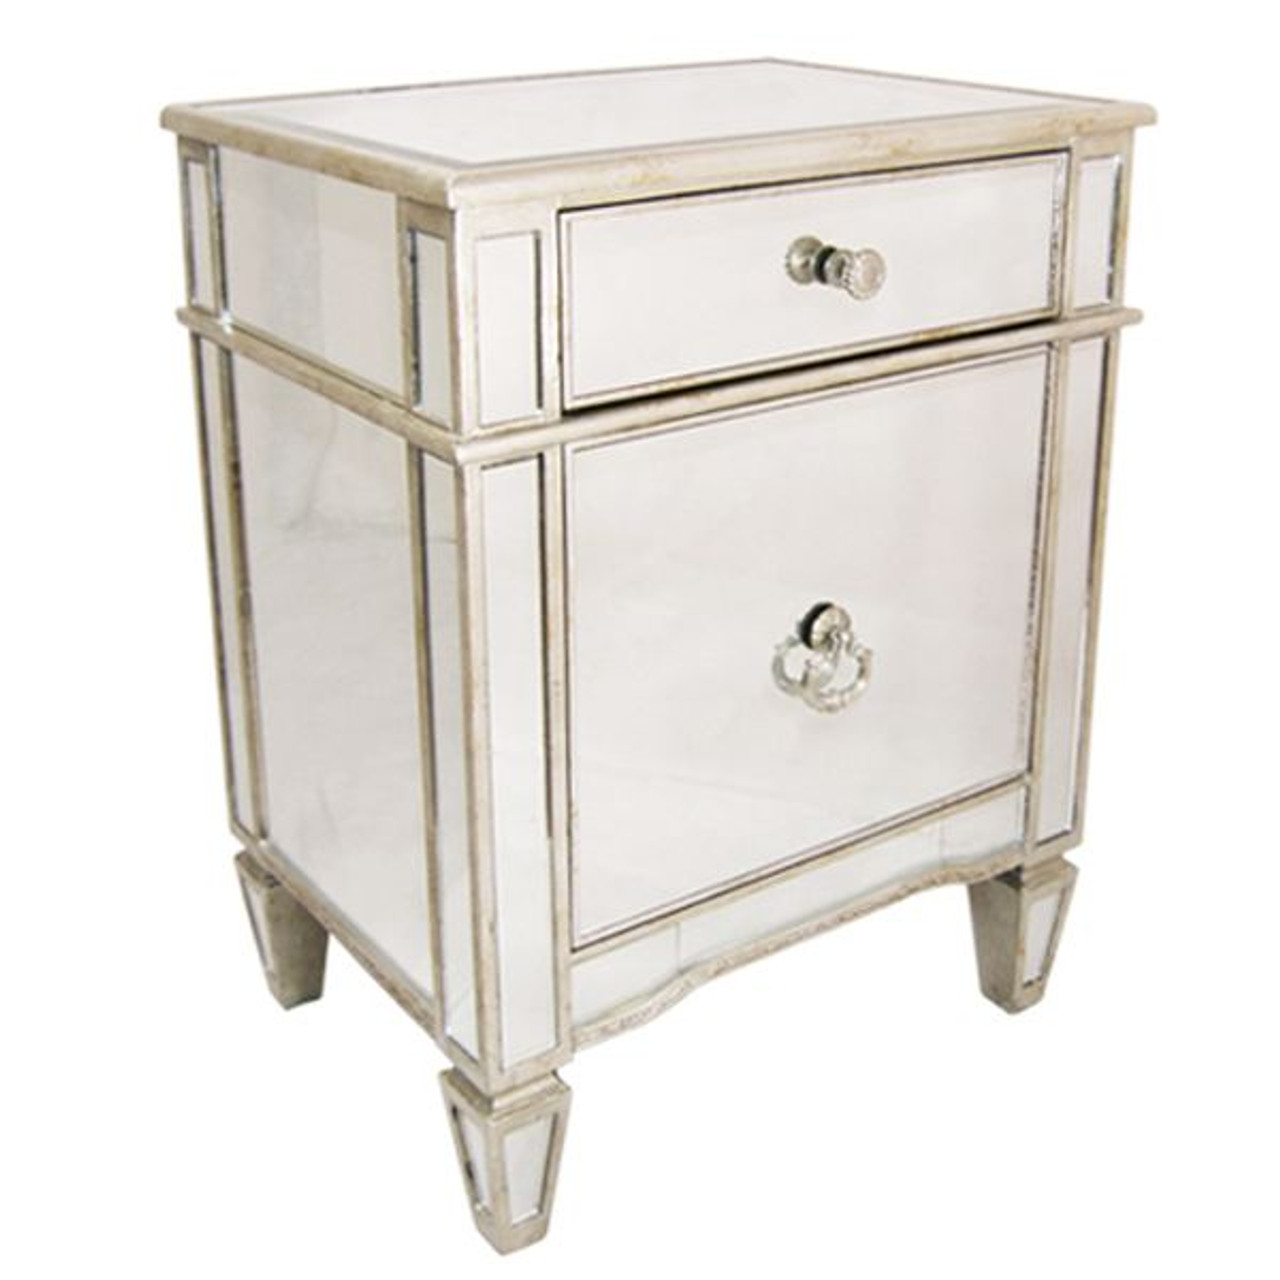 Antique Mirrored Bedside Cabinet Mirrored Antique Furniture